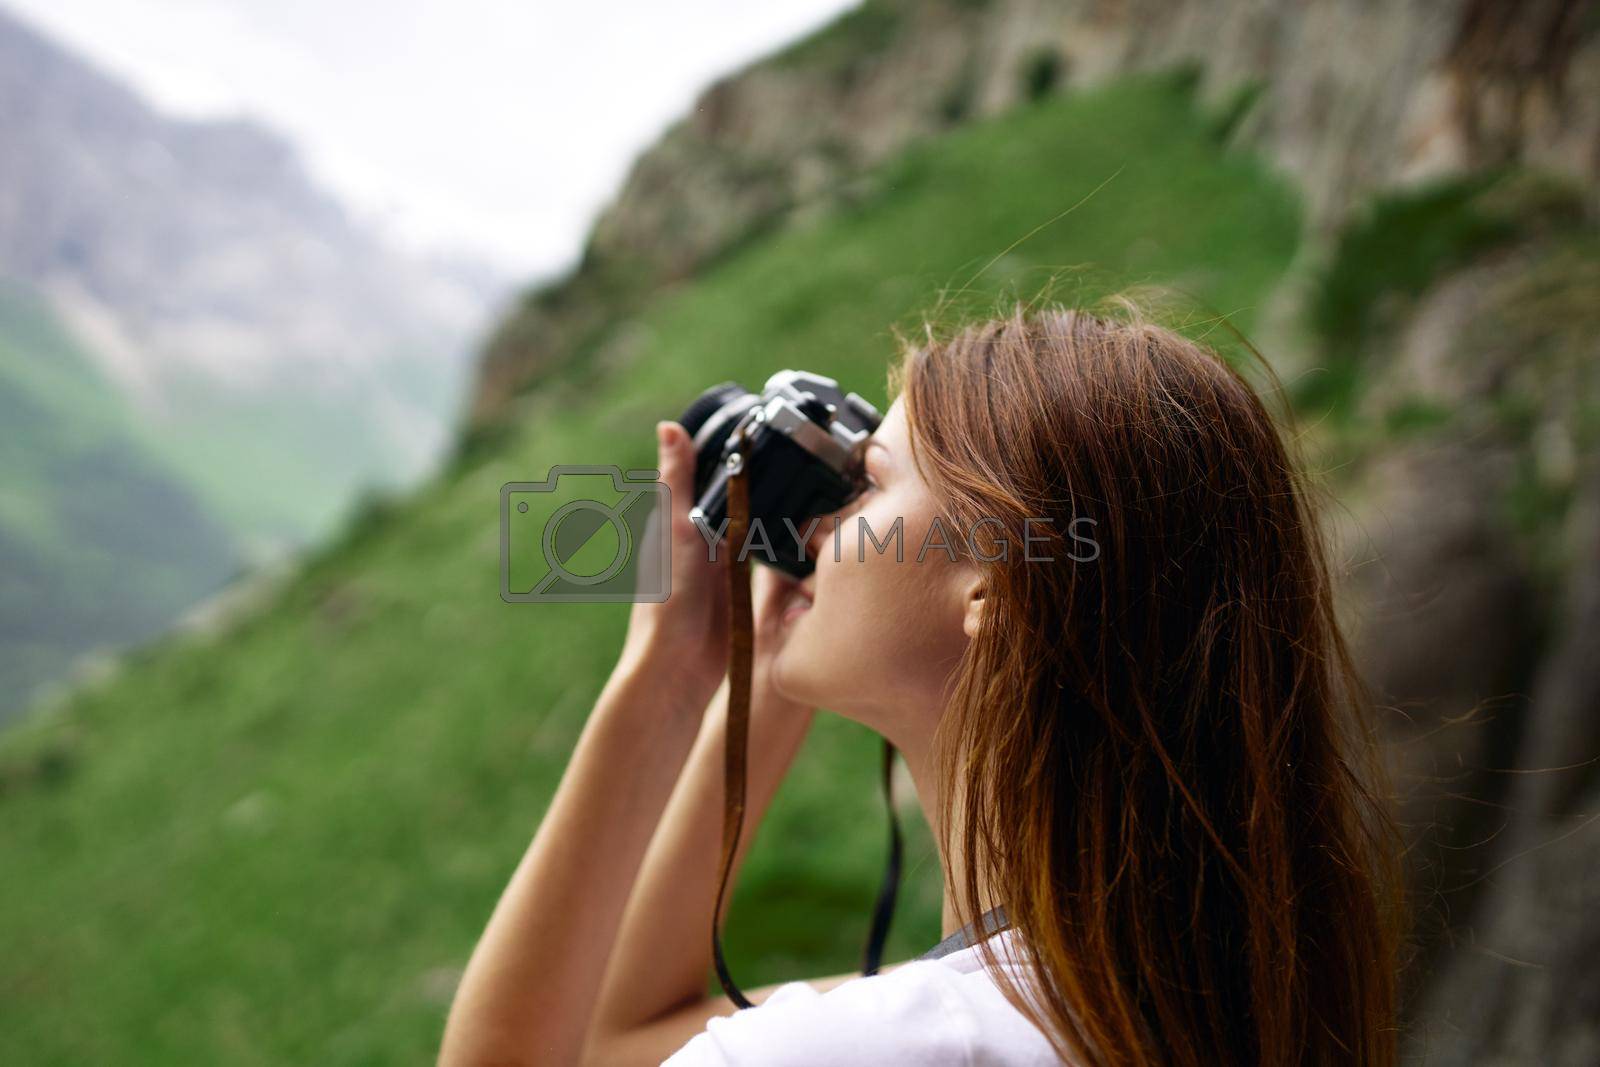 Royalty free image of woman photographer nature professionals landscape hobby lifestyle by Vichizh